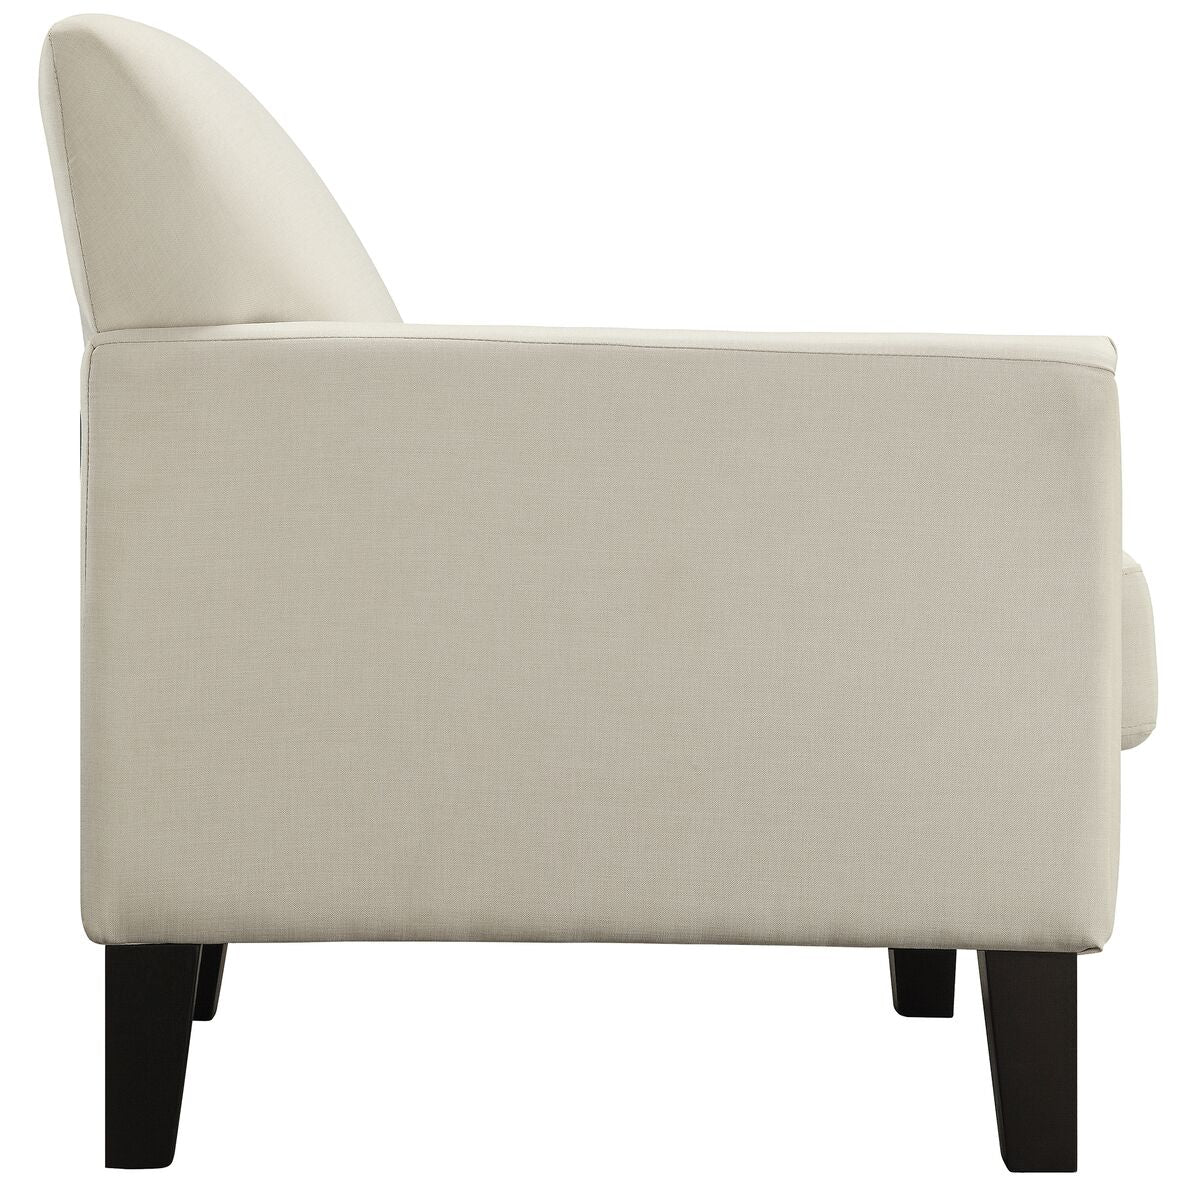 Modern Accent Chair with Ottoman - White Linen